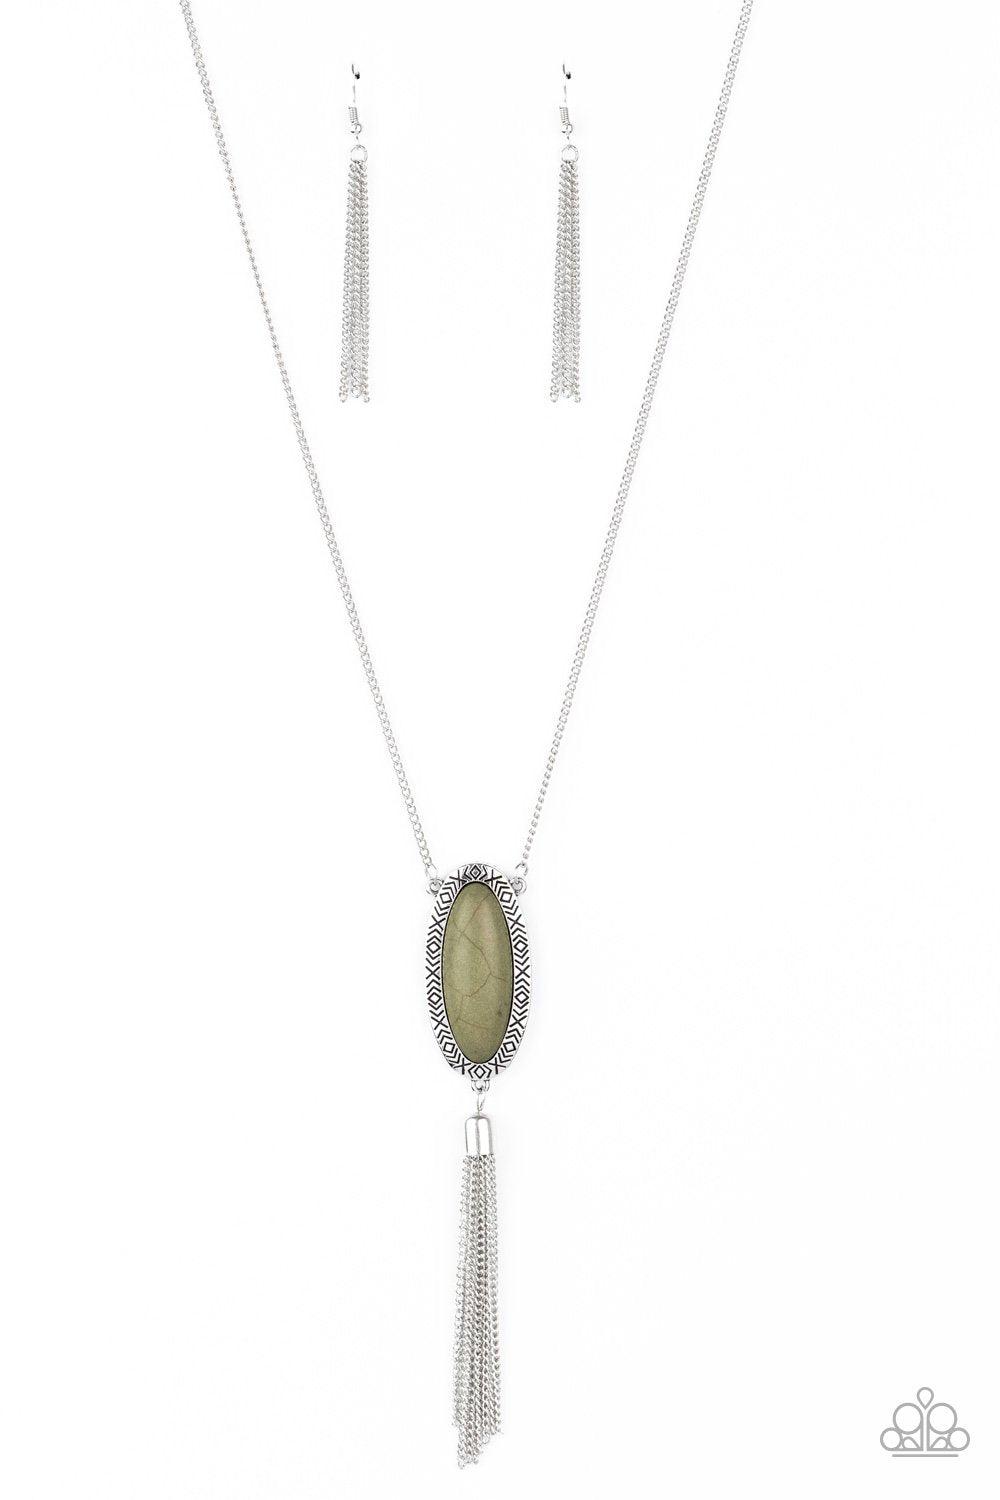 Ethereal Eden Olive Green Stone and Silver Tassel Necklace - Paparazzi Accessories-CarasShop.com - $5 Jewelry by Cara Jewels